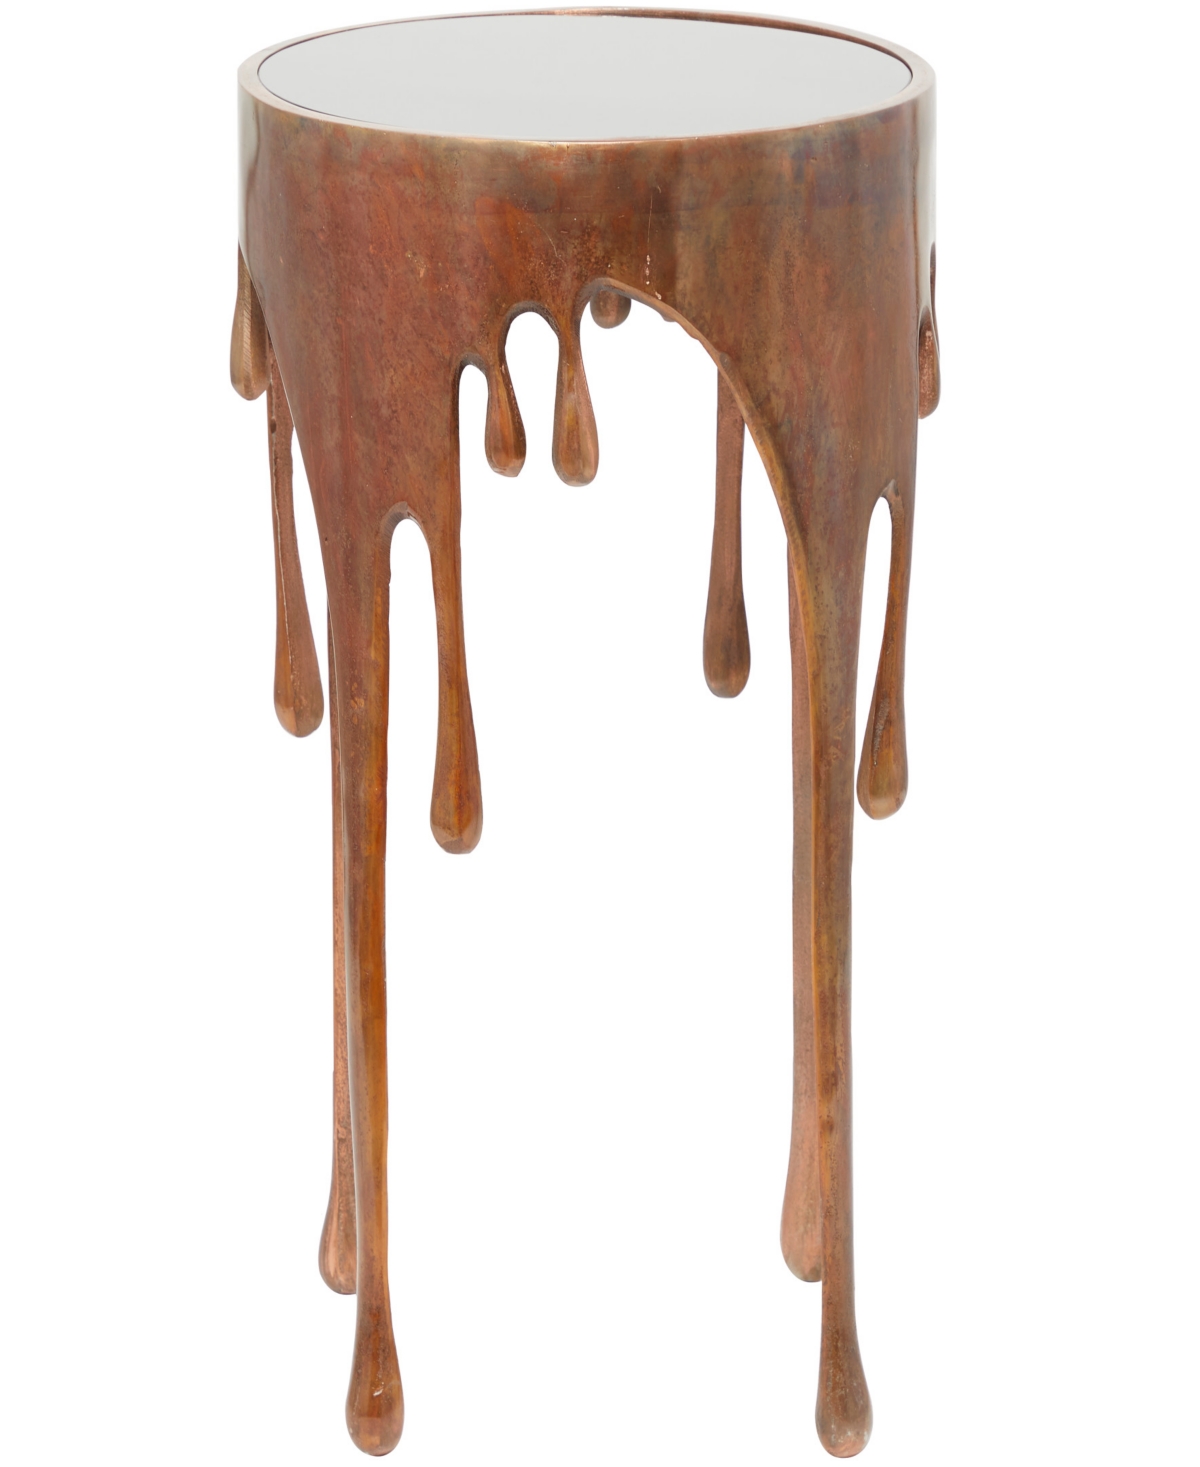 Rosemary Lane Aluminum Drip Accent Table With Melting Design And Shaded Glass Top, 16" X 16" X 25" In Copper